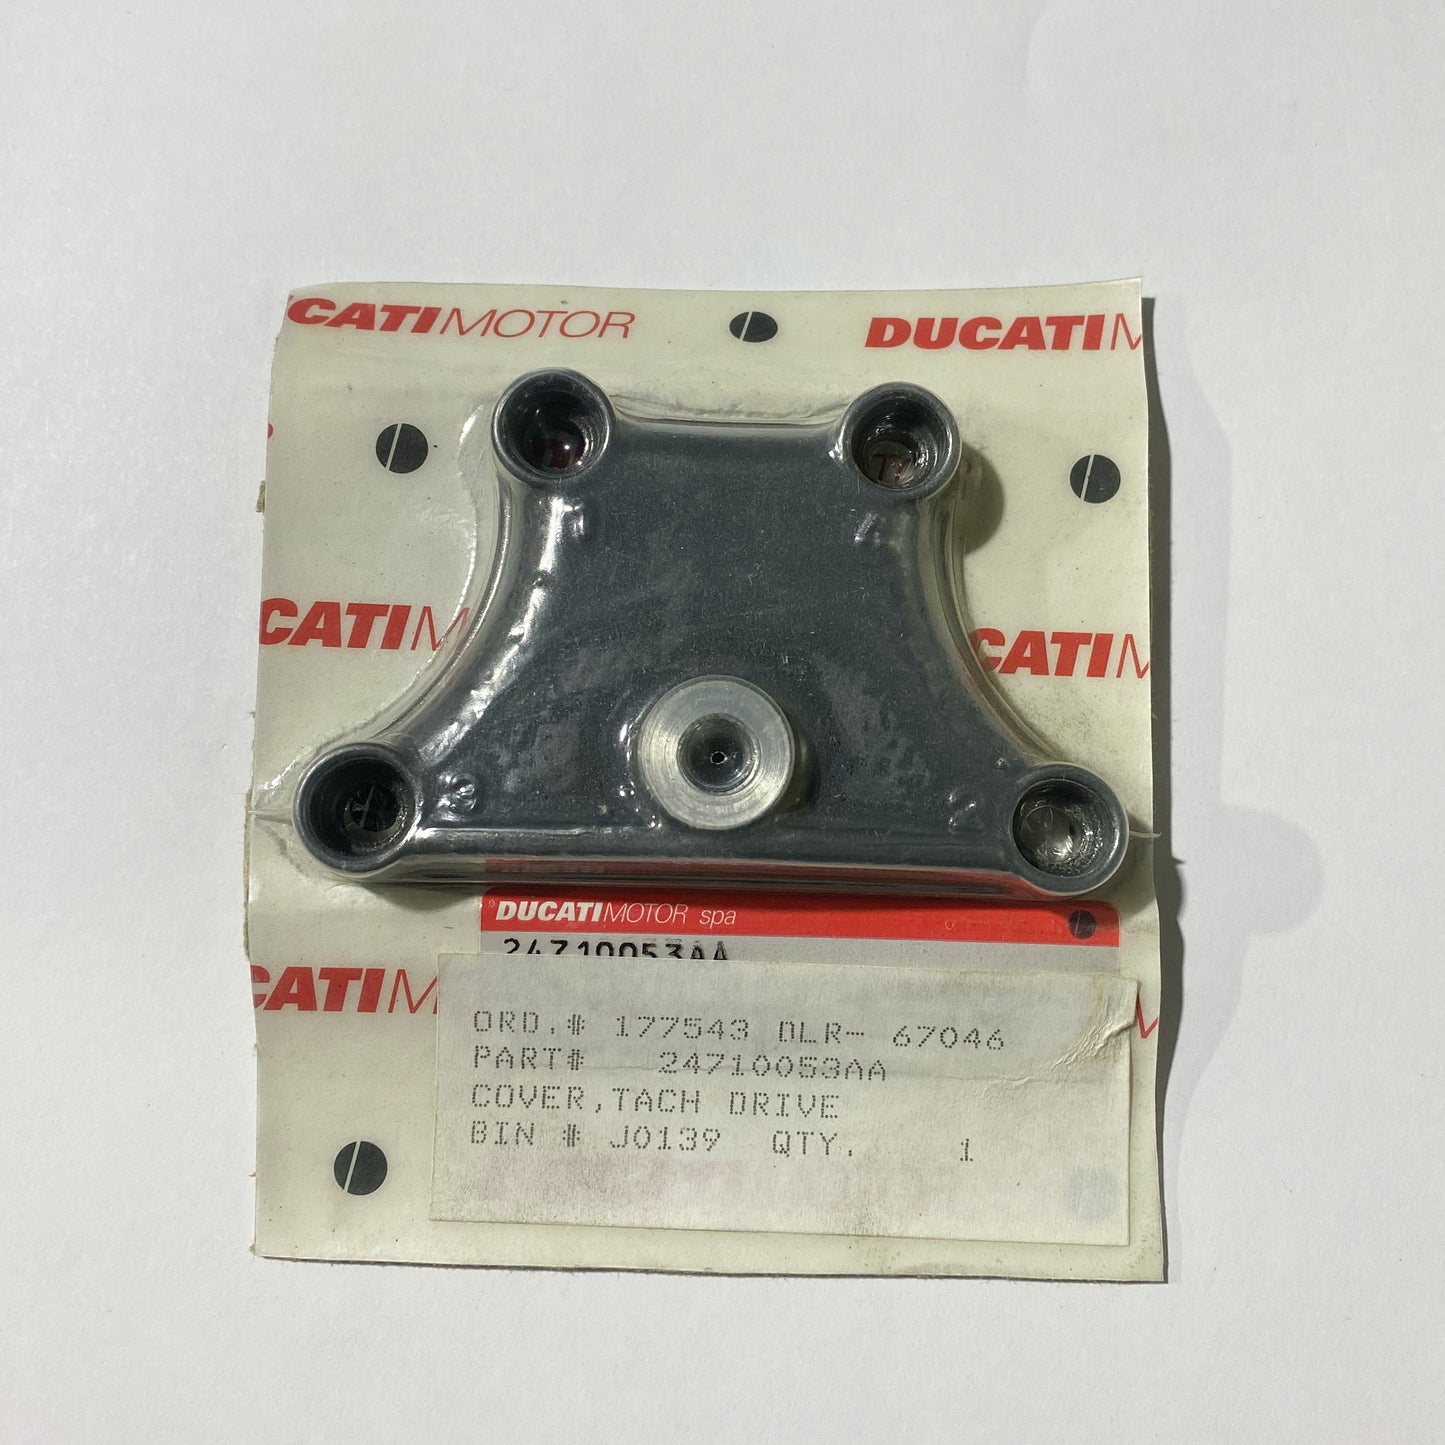 DUCATI CENTRAL COVER 24710053AA